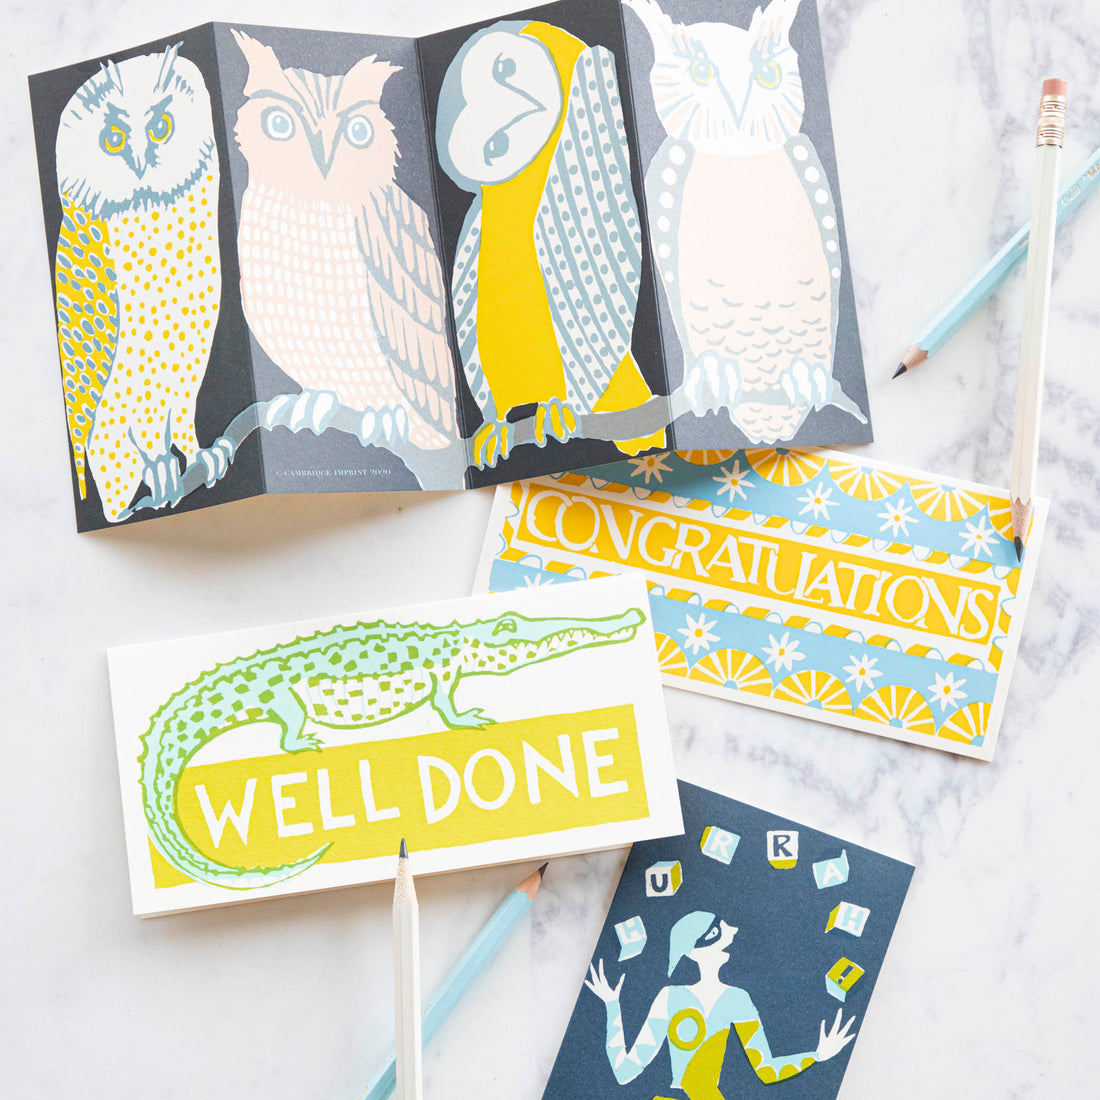 Four stylized owl illustrations on a Wise Old Birds Card by Cambridge Imprint for bird lovers.